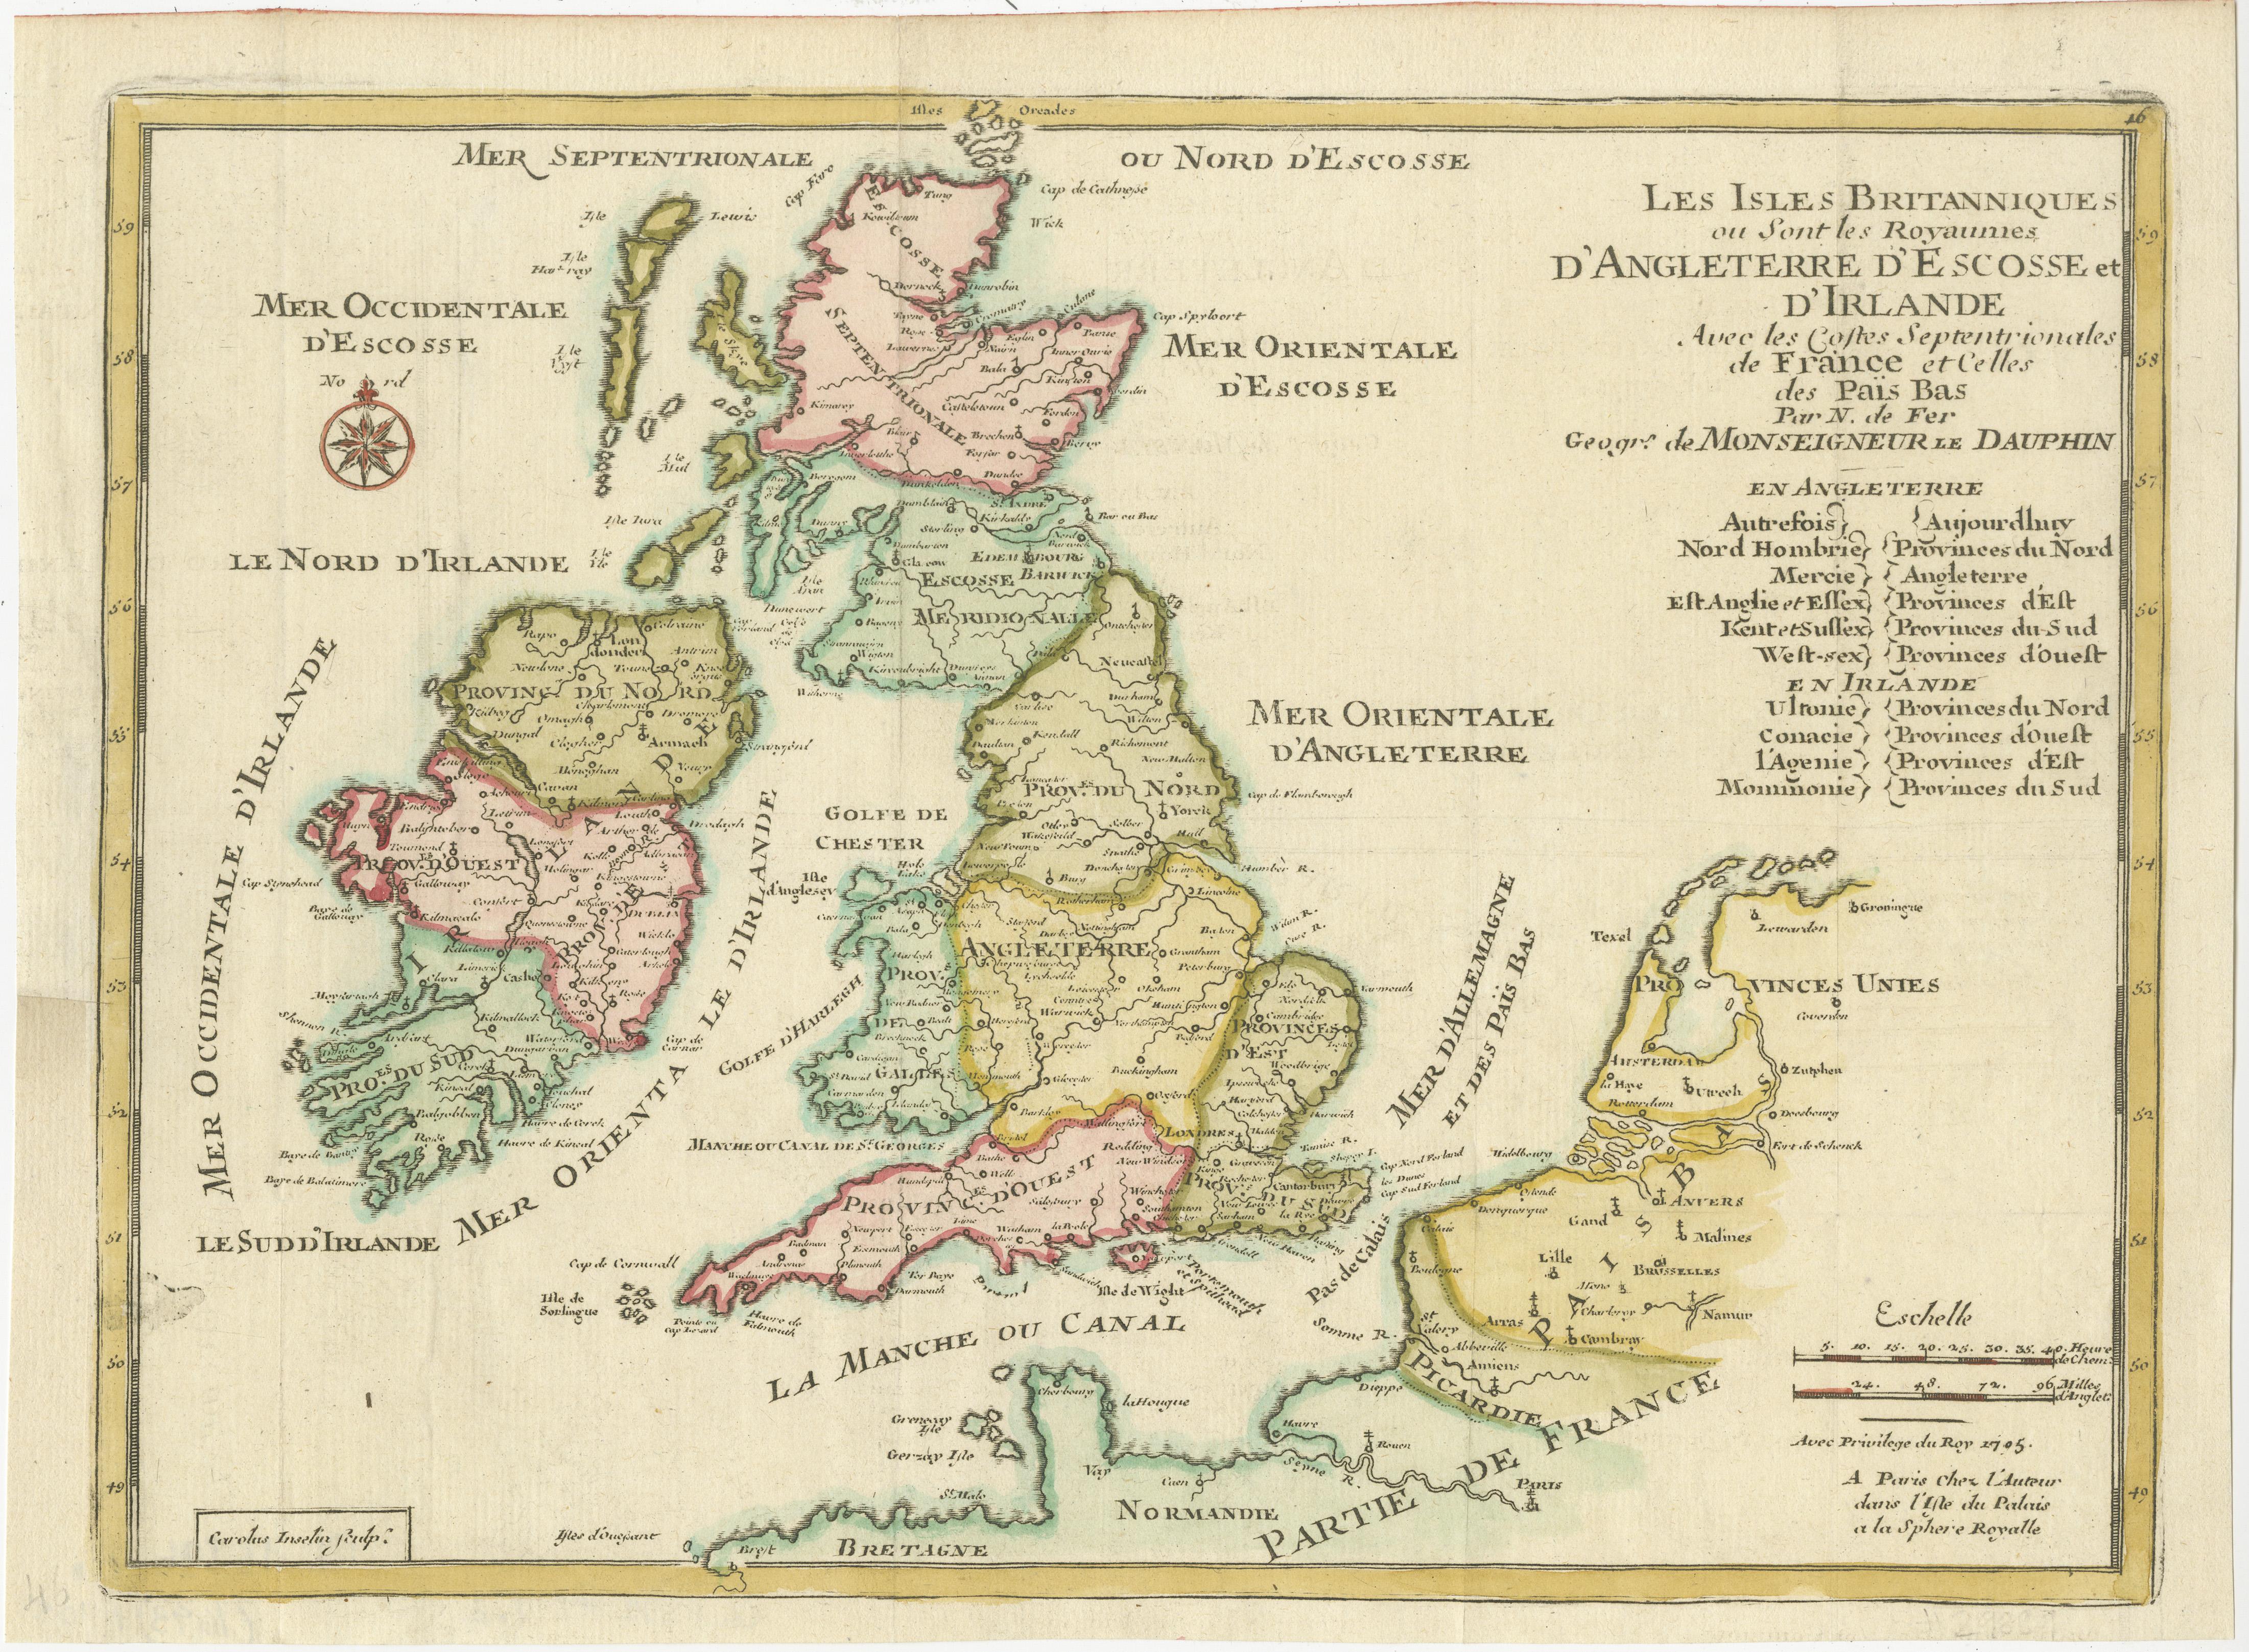 Antique map titled 'Les Isles Britanniques, ou sont les Royaumes d Angleterre (..)'. Detailed map of England, Ireland, Scotland and Wales, with French coast and part of the Netherlands. Shows political and administrative divisions, landmarks and